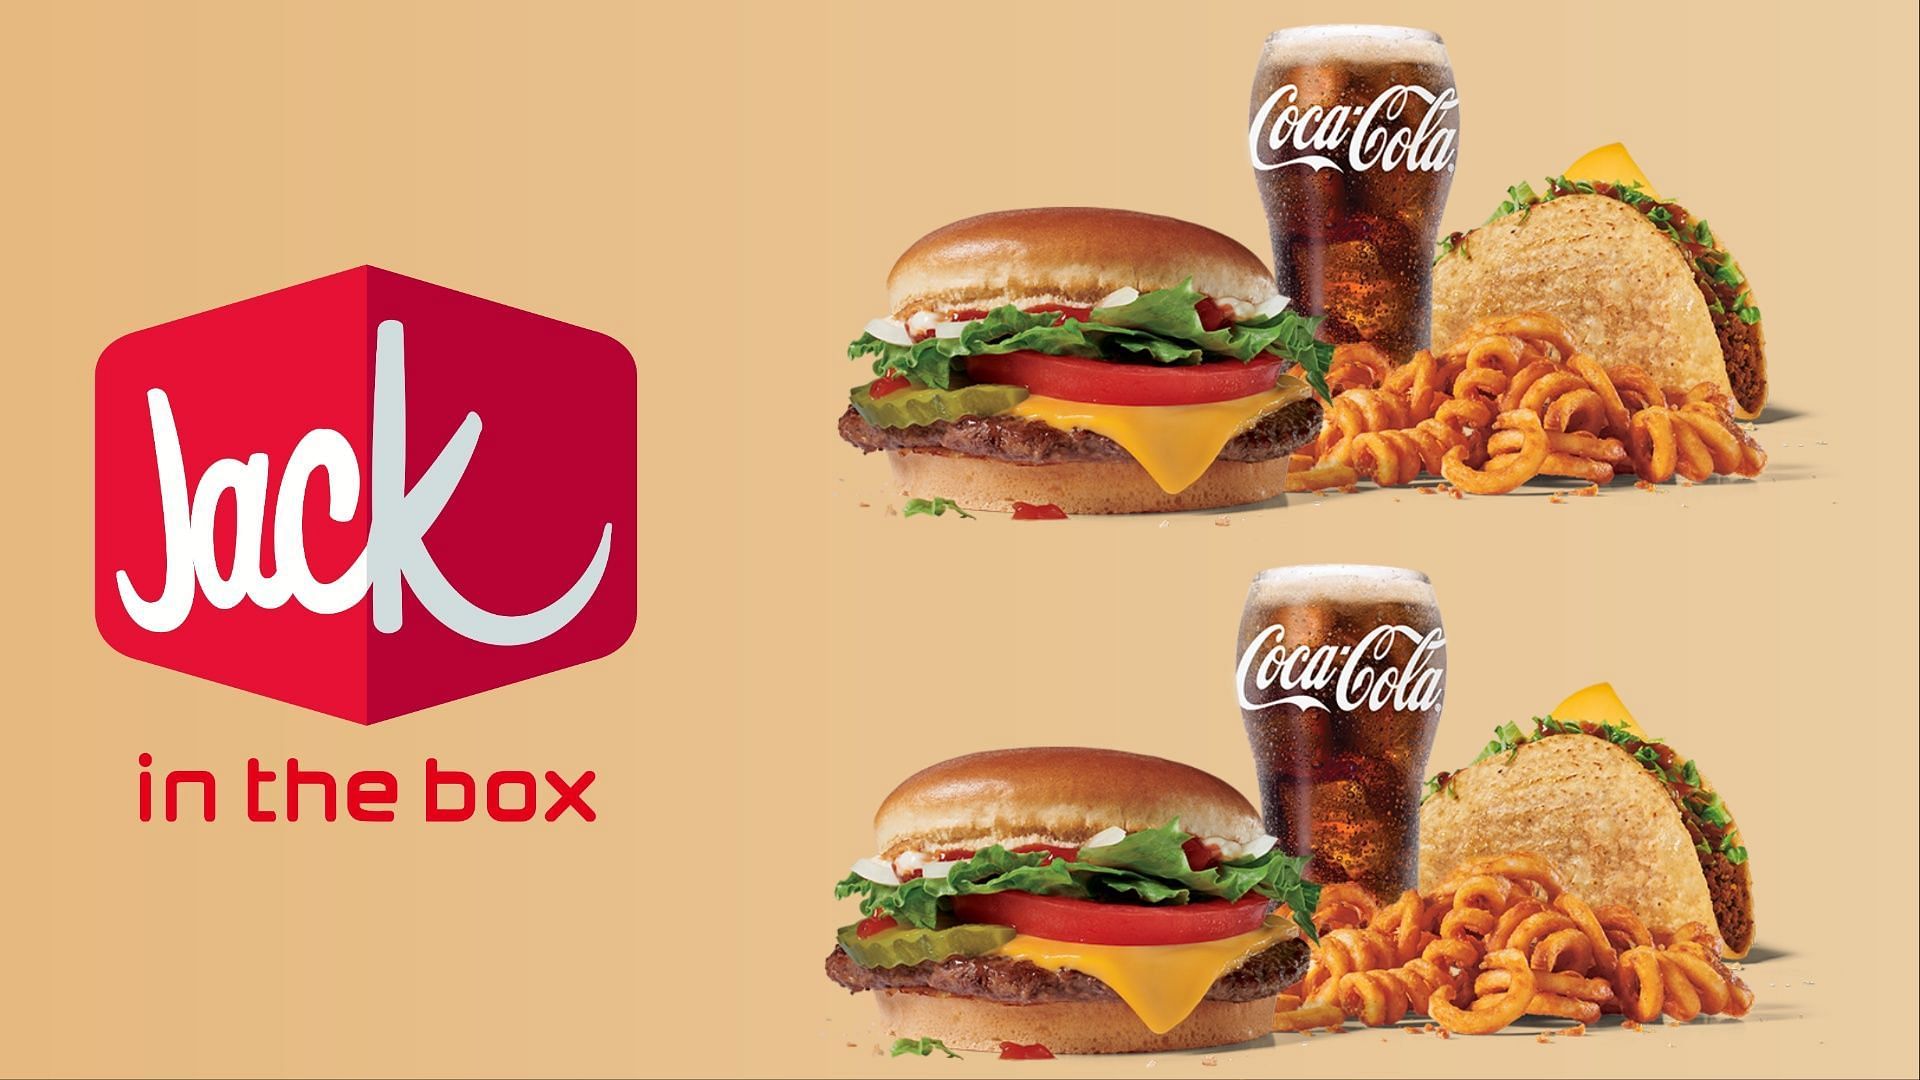 Jack in the Box introduces a new $5 Jack Pack meal deal (Image via Jack in the Box)